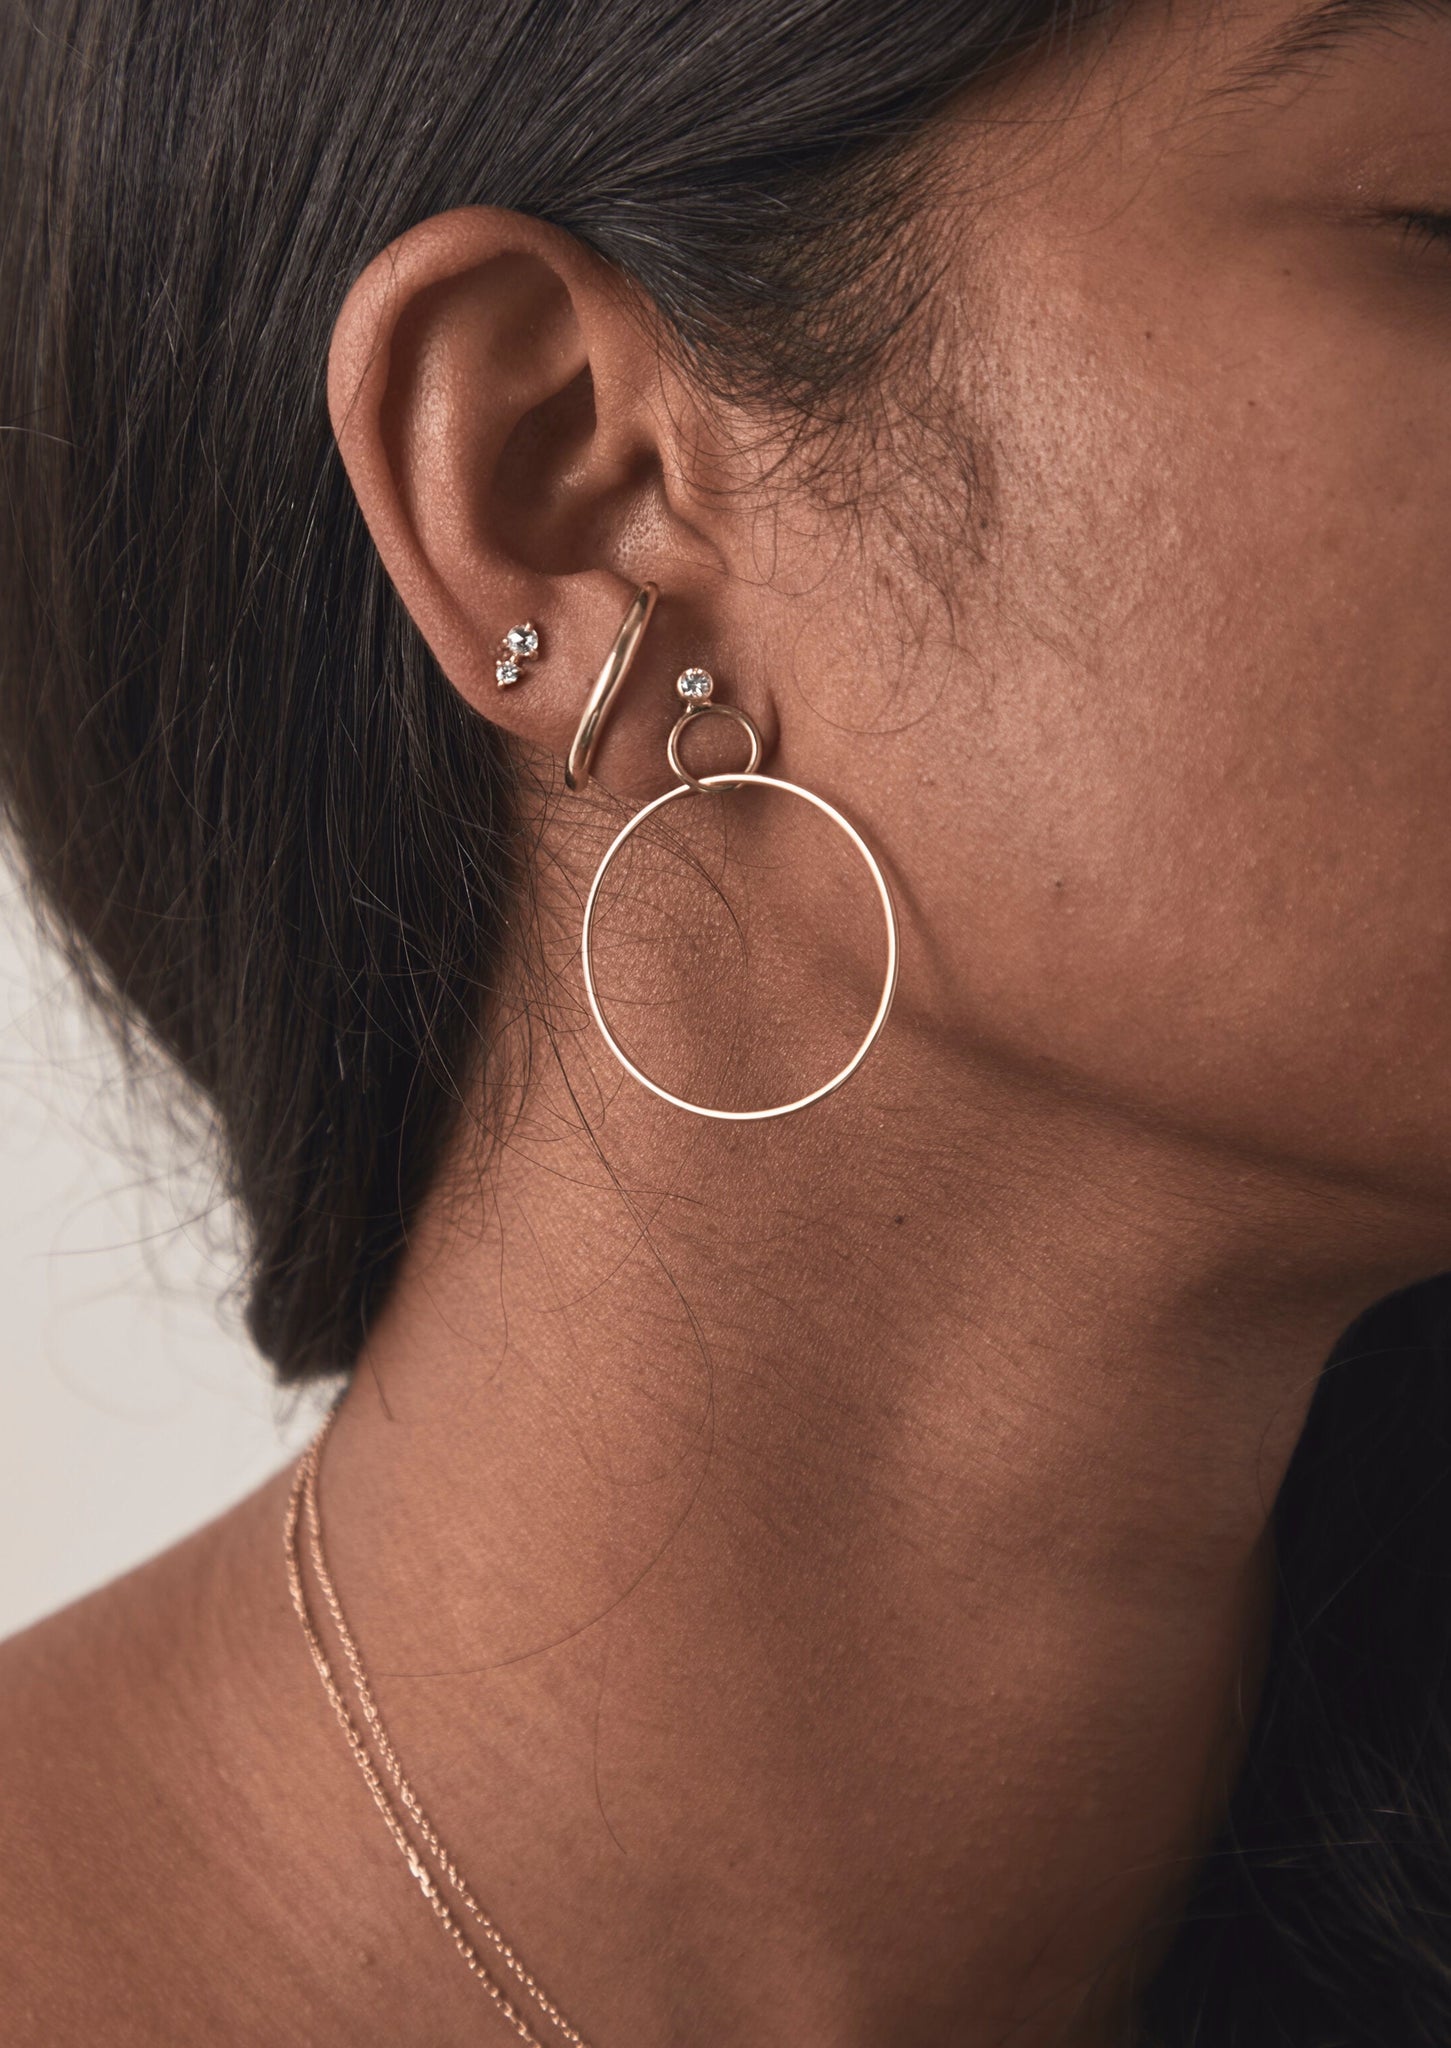 Cove Earring // Solid Gold and Champagne Diamond